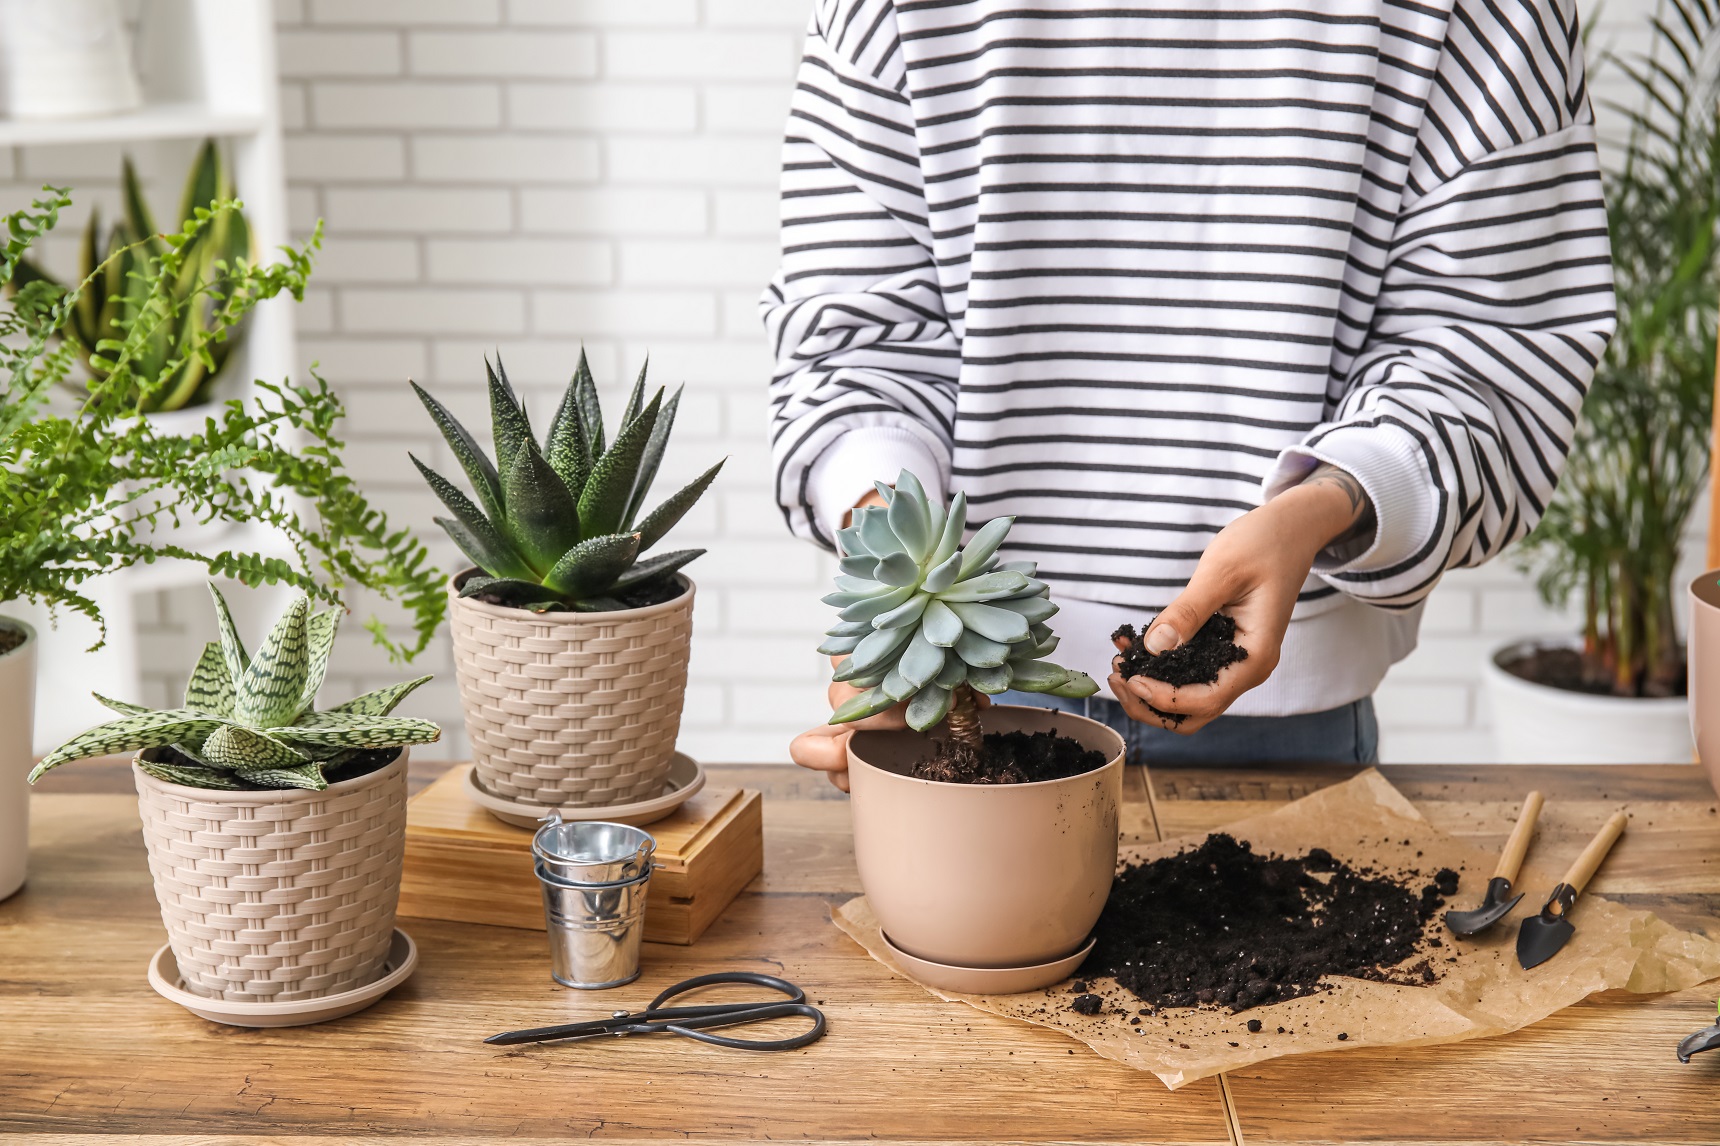 If you’re a first-time plant parent or you’re on a busy schedule, low-maintenance succulents like echeveria and cacti are a great place to start